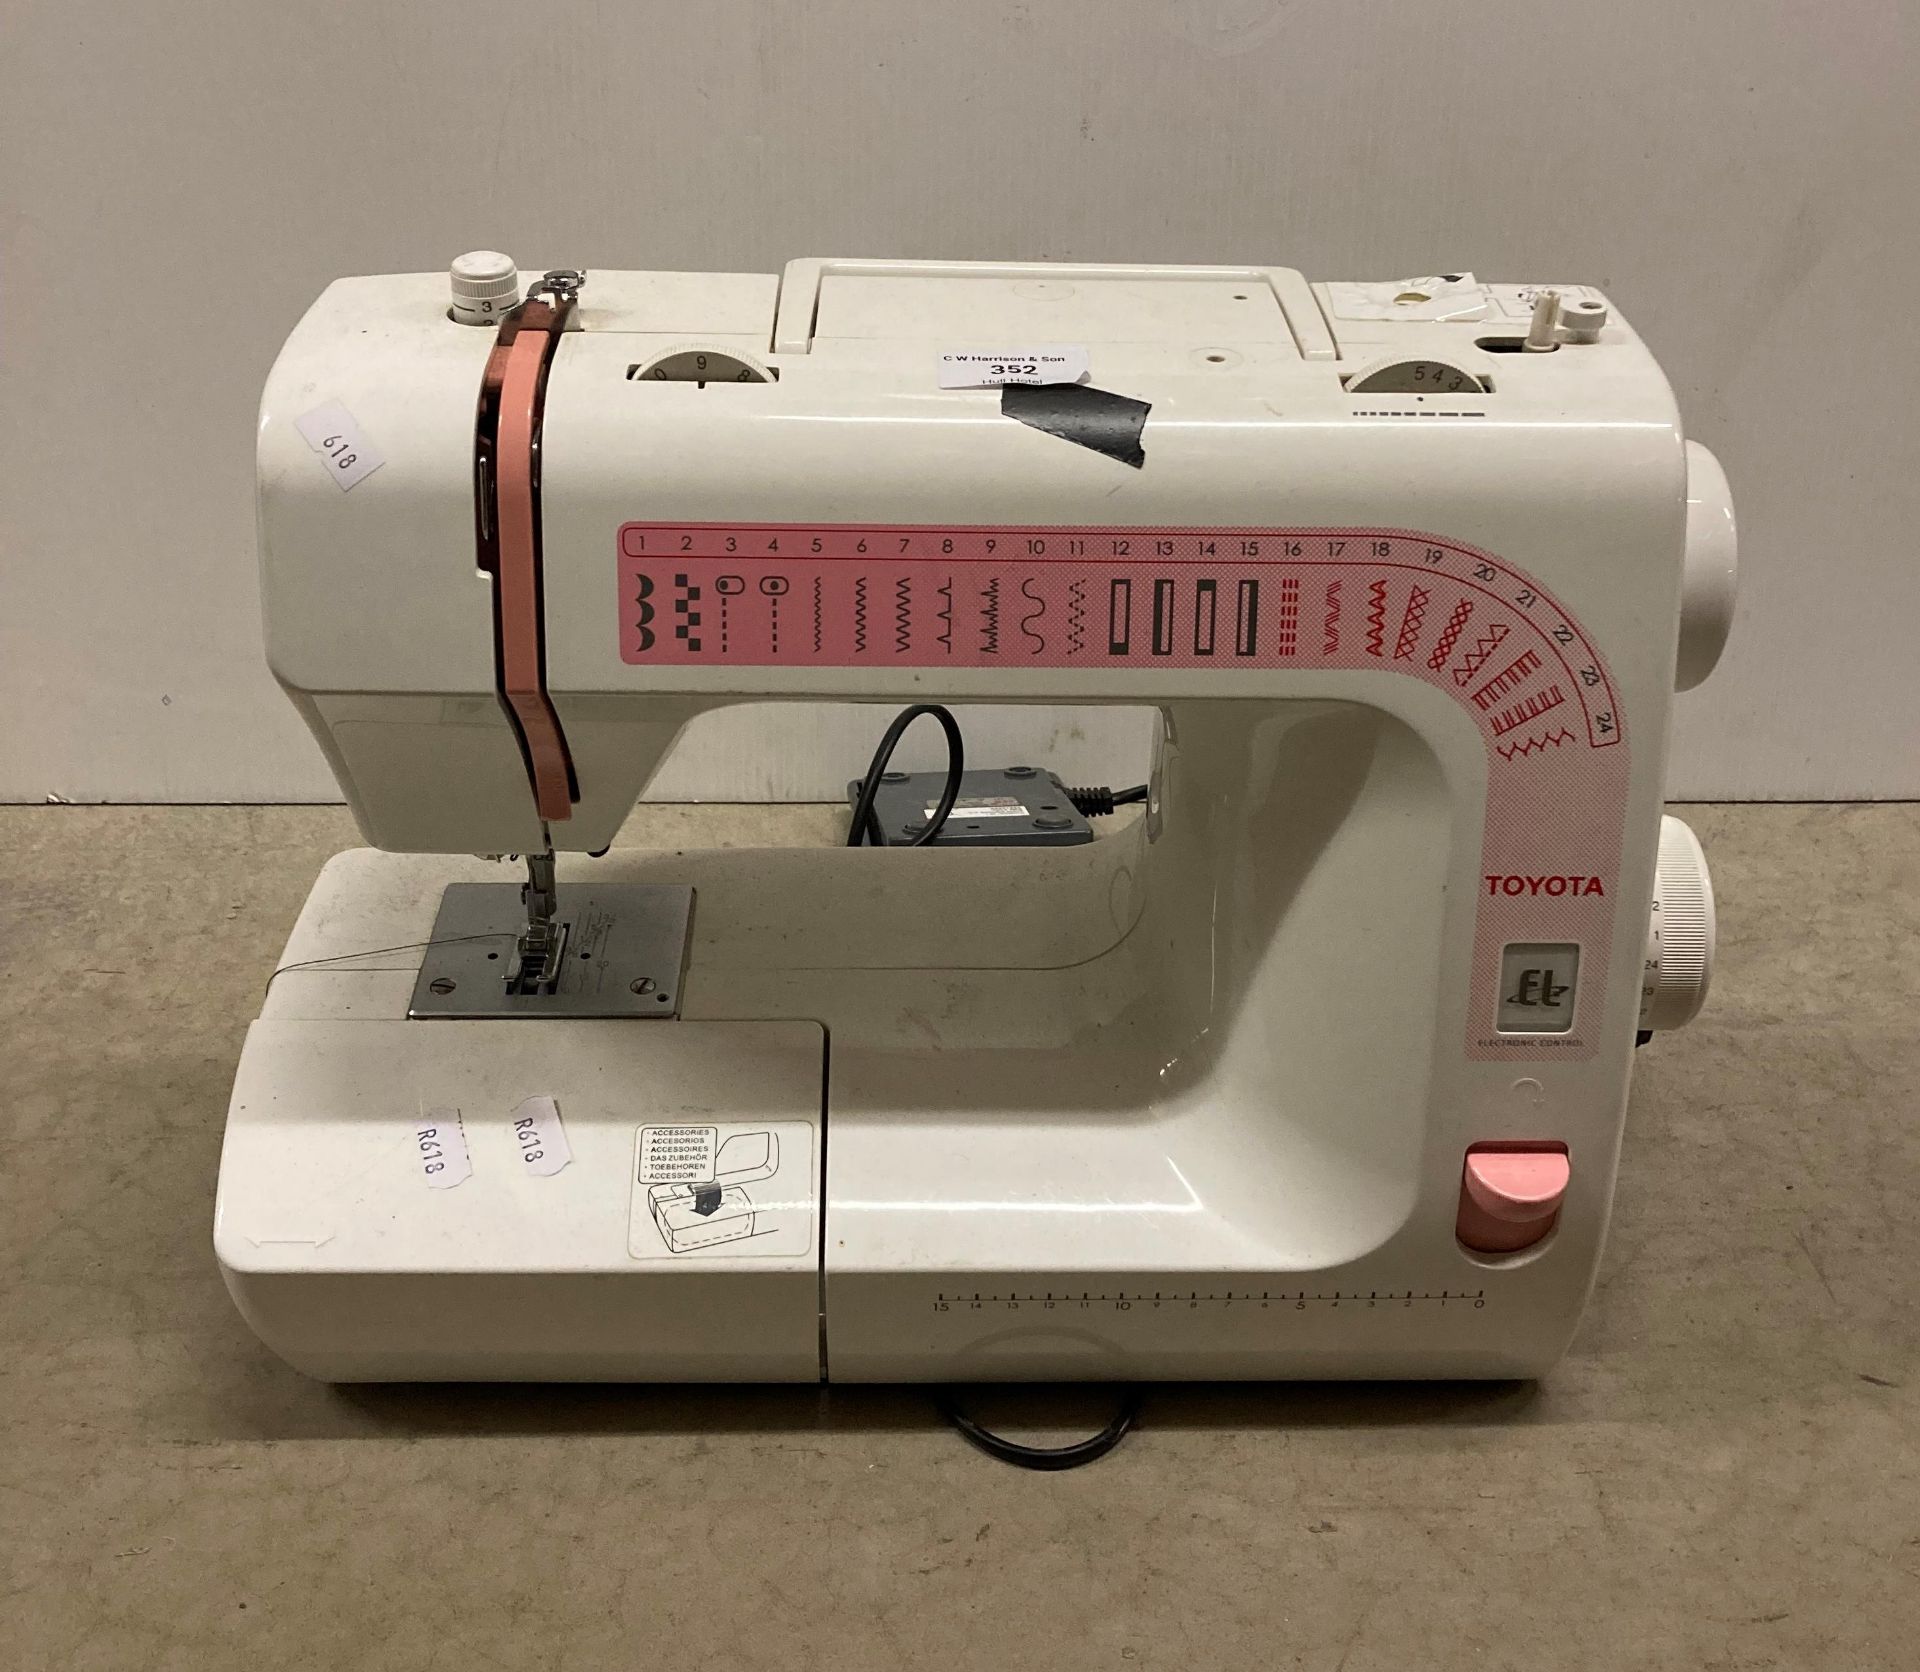 Toyota electric foot-operated sewing machine,